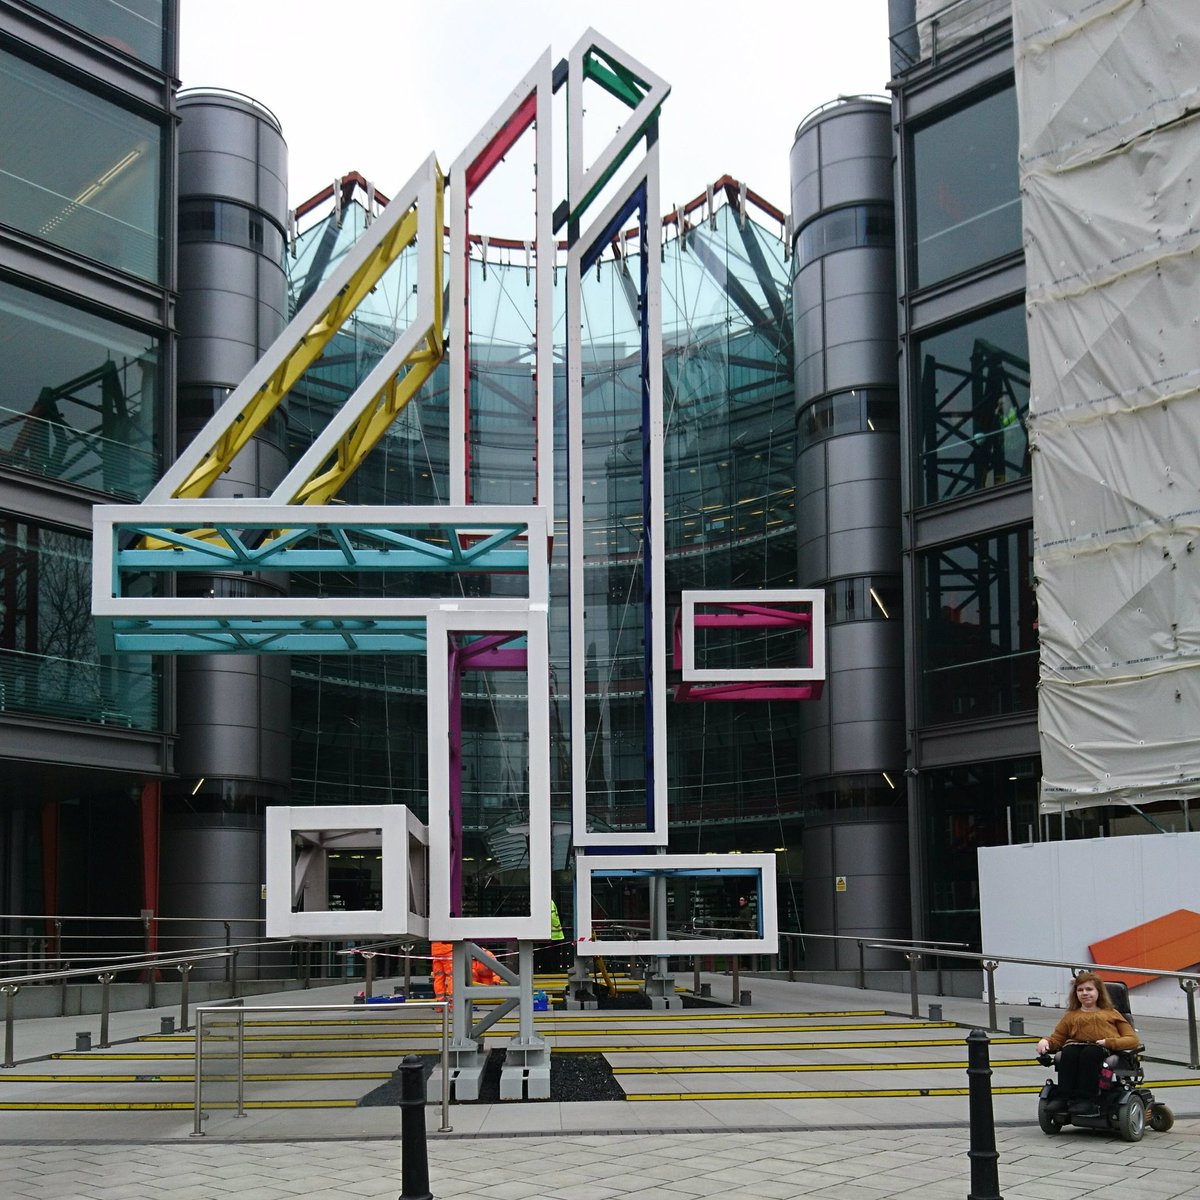 'Different does not mean worse' - powerful words at the #DisSecChamps event @Channel4 this morning. Fantastic to hear about all the excellent work being done by the champions to make their sectors more inclusive and accessible for disabled people- keep at it t!